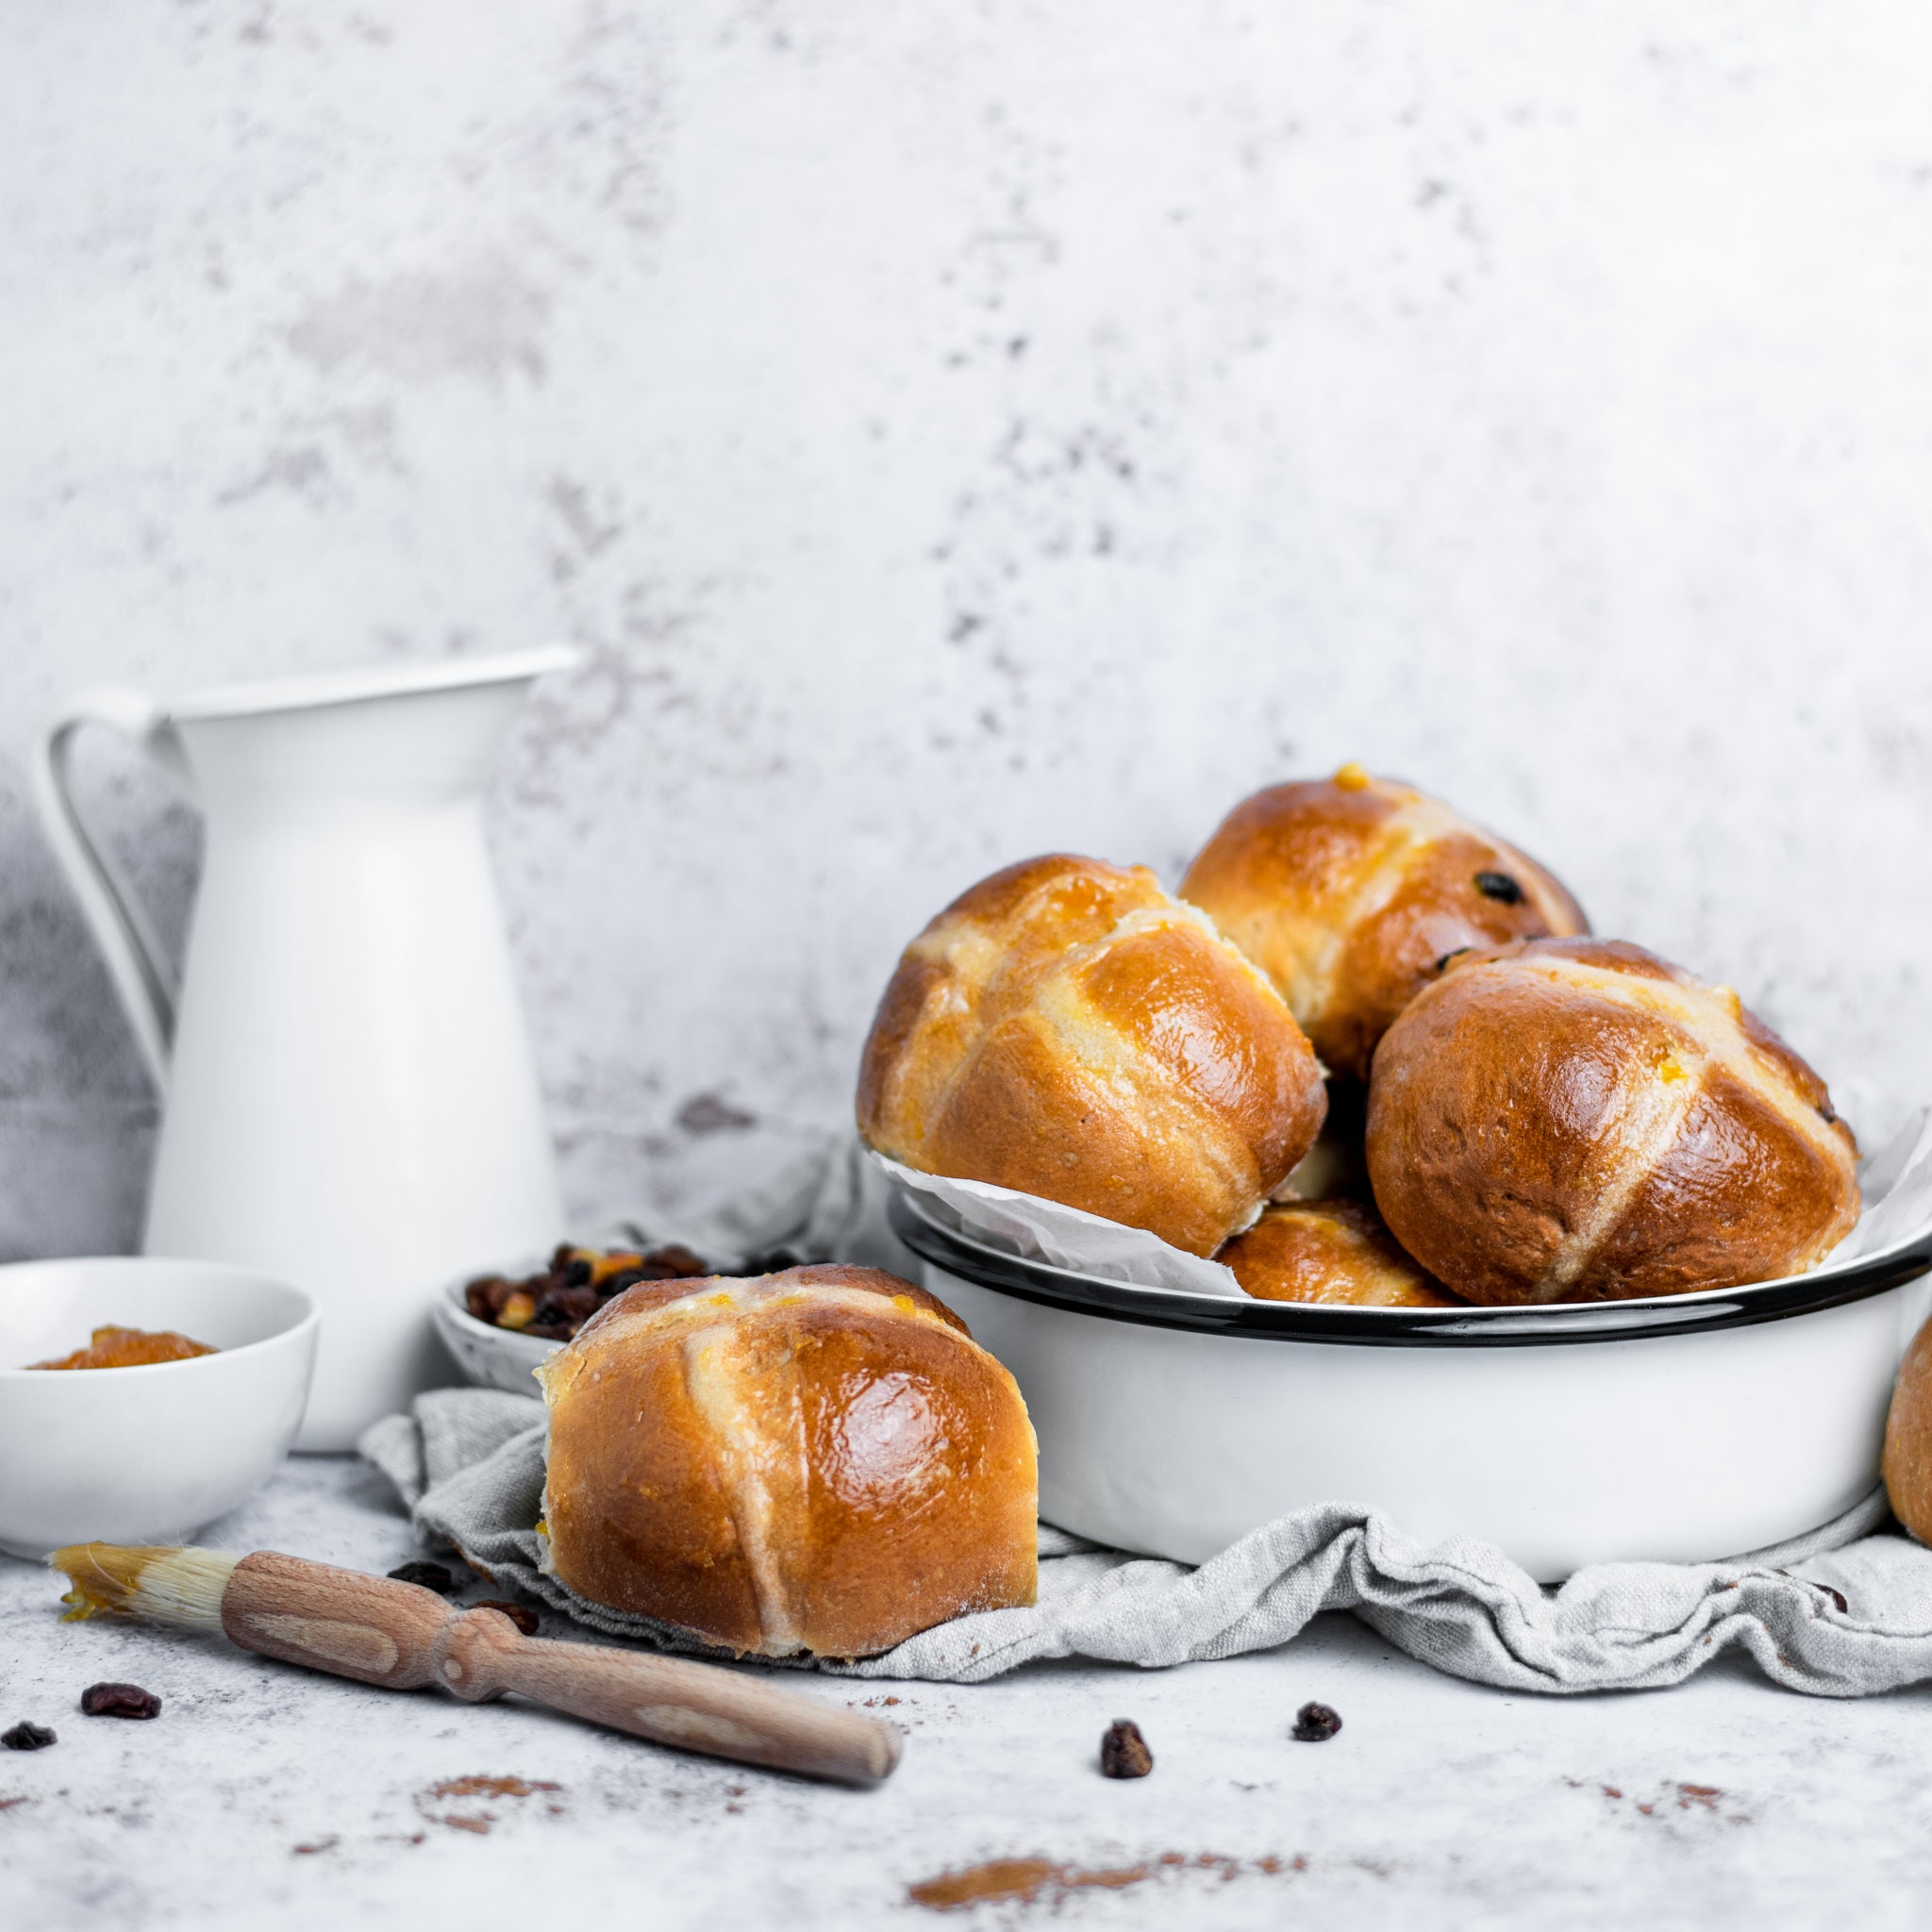 White dish filled with hot cross buns next to a single hot cross bun